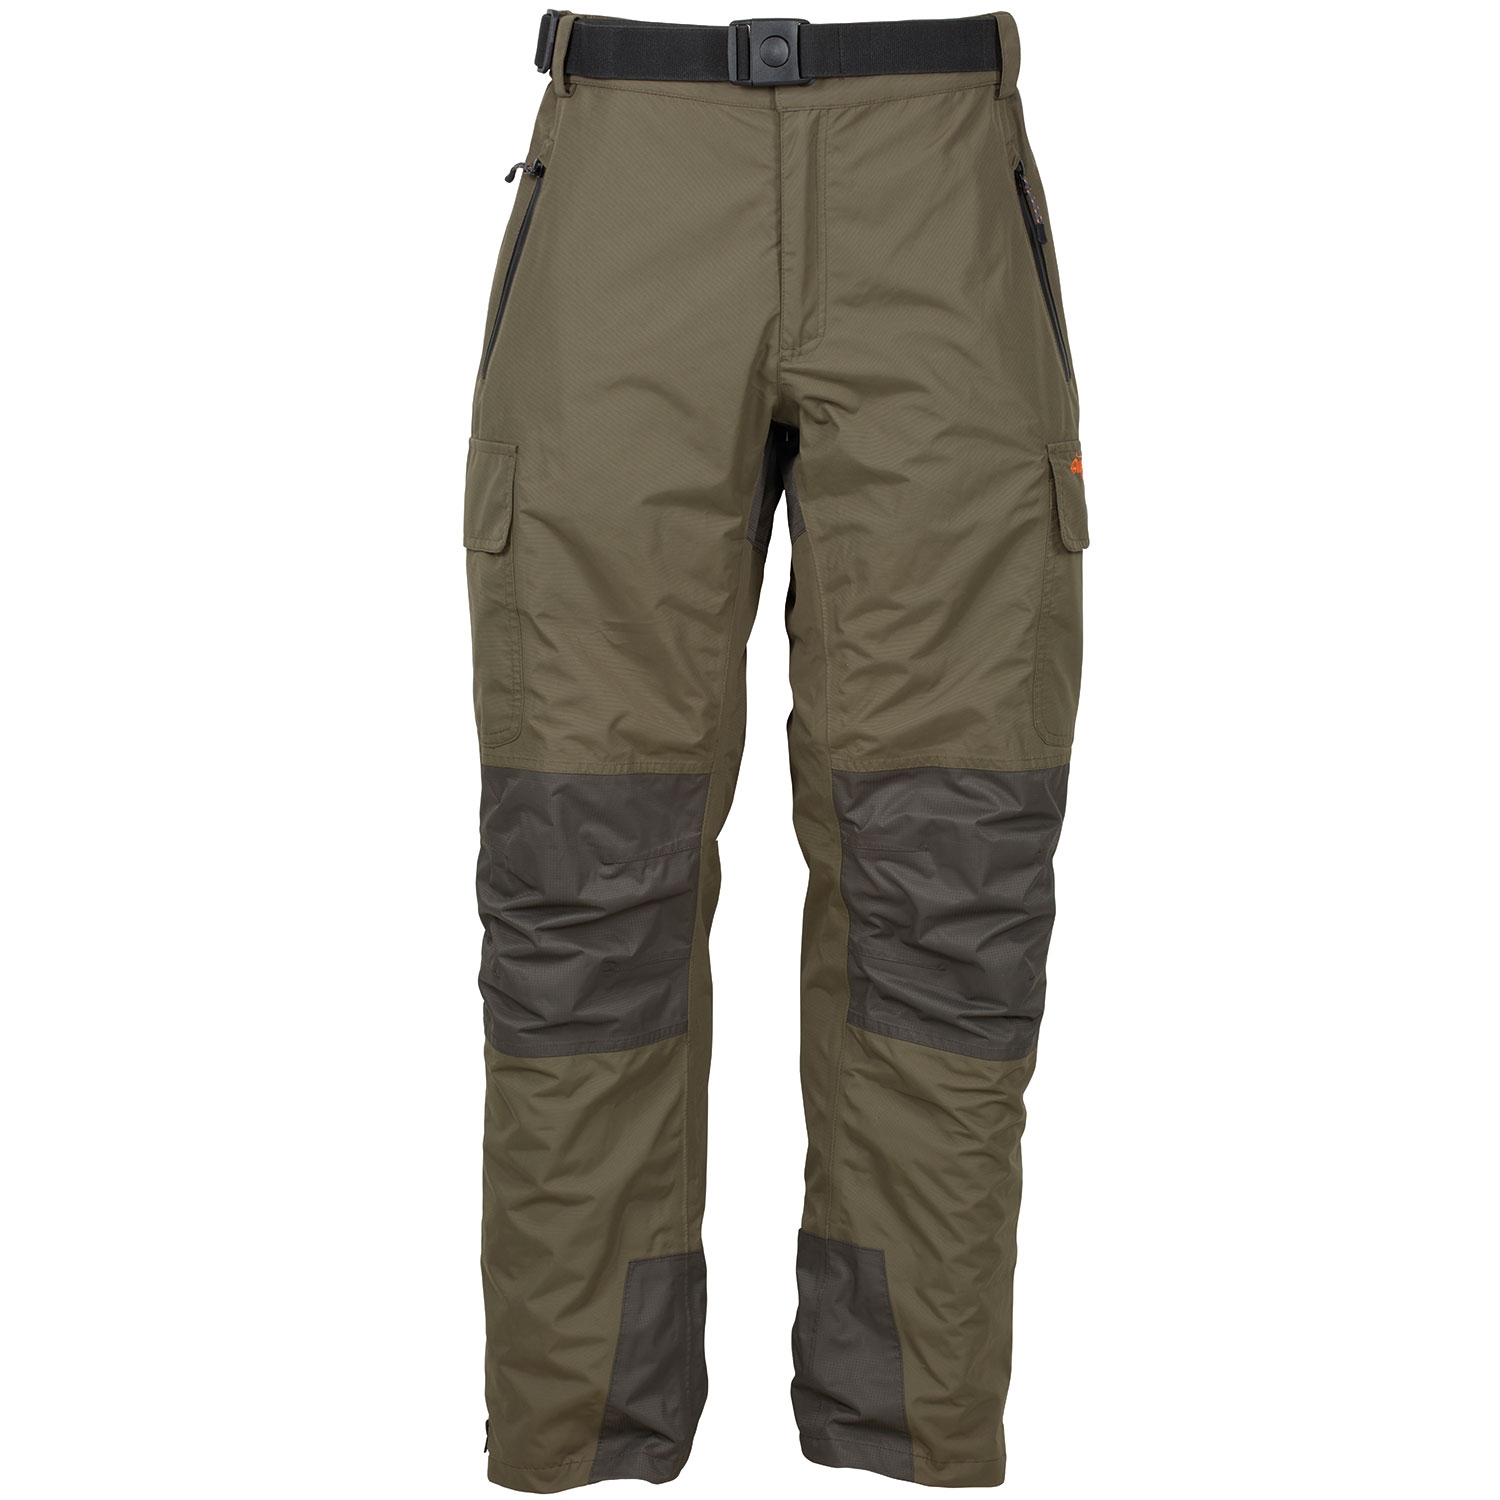 Airflo Defender Over Trousers - Breathable Fishing Clothing